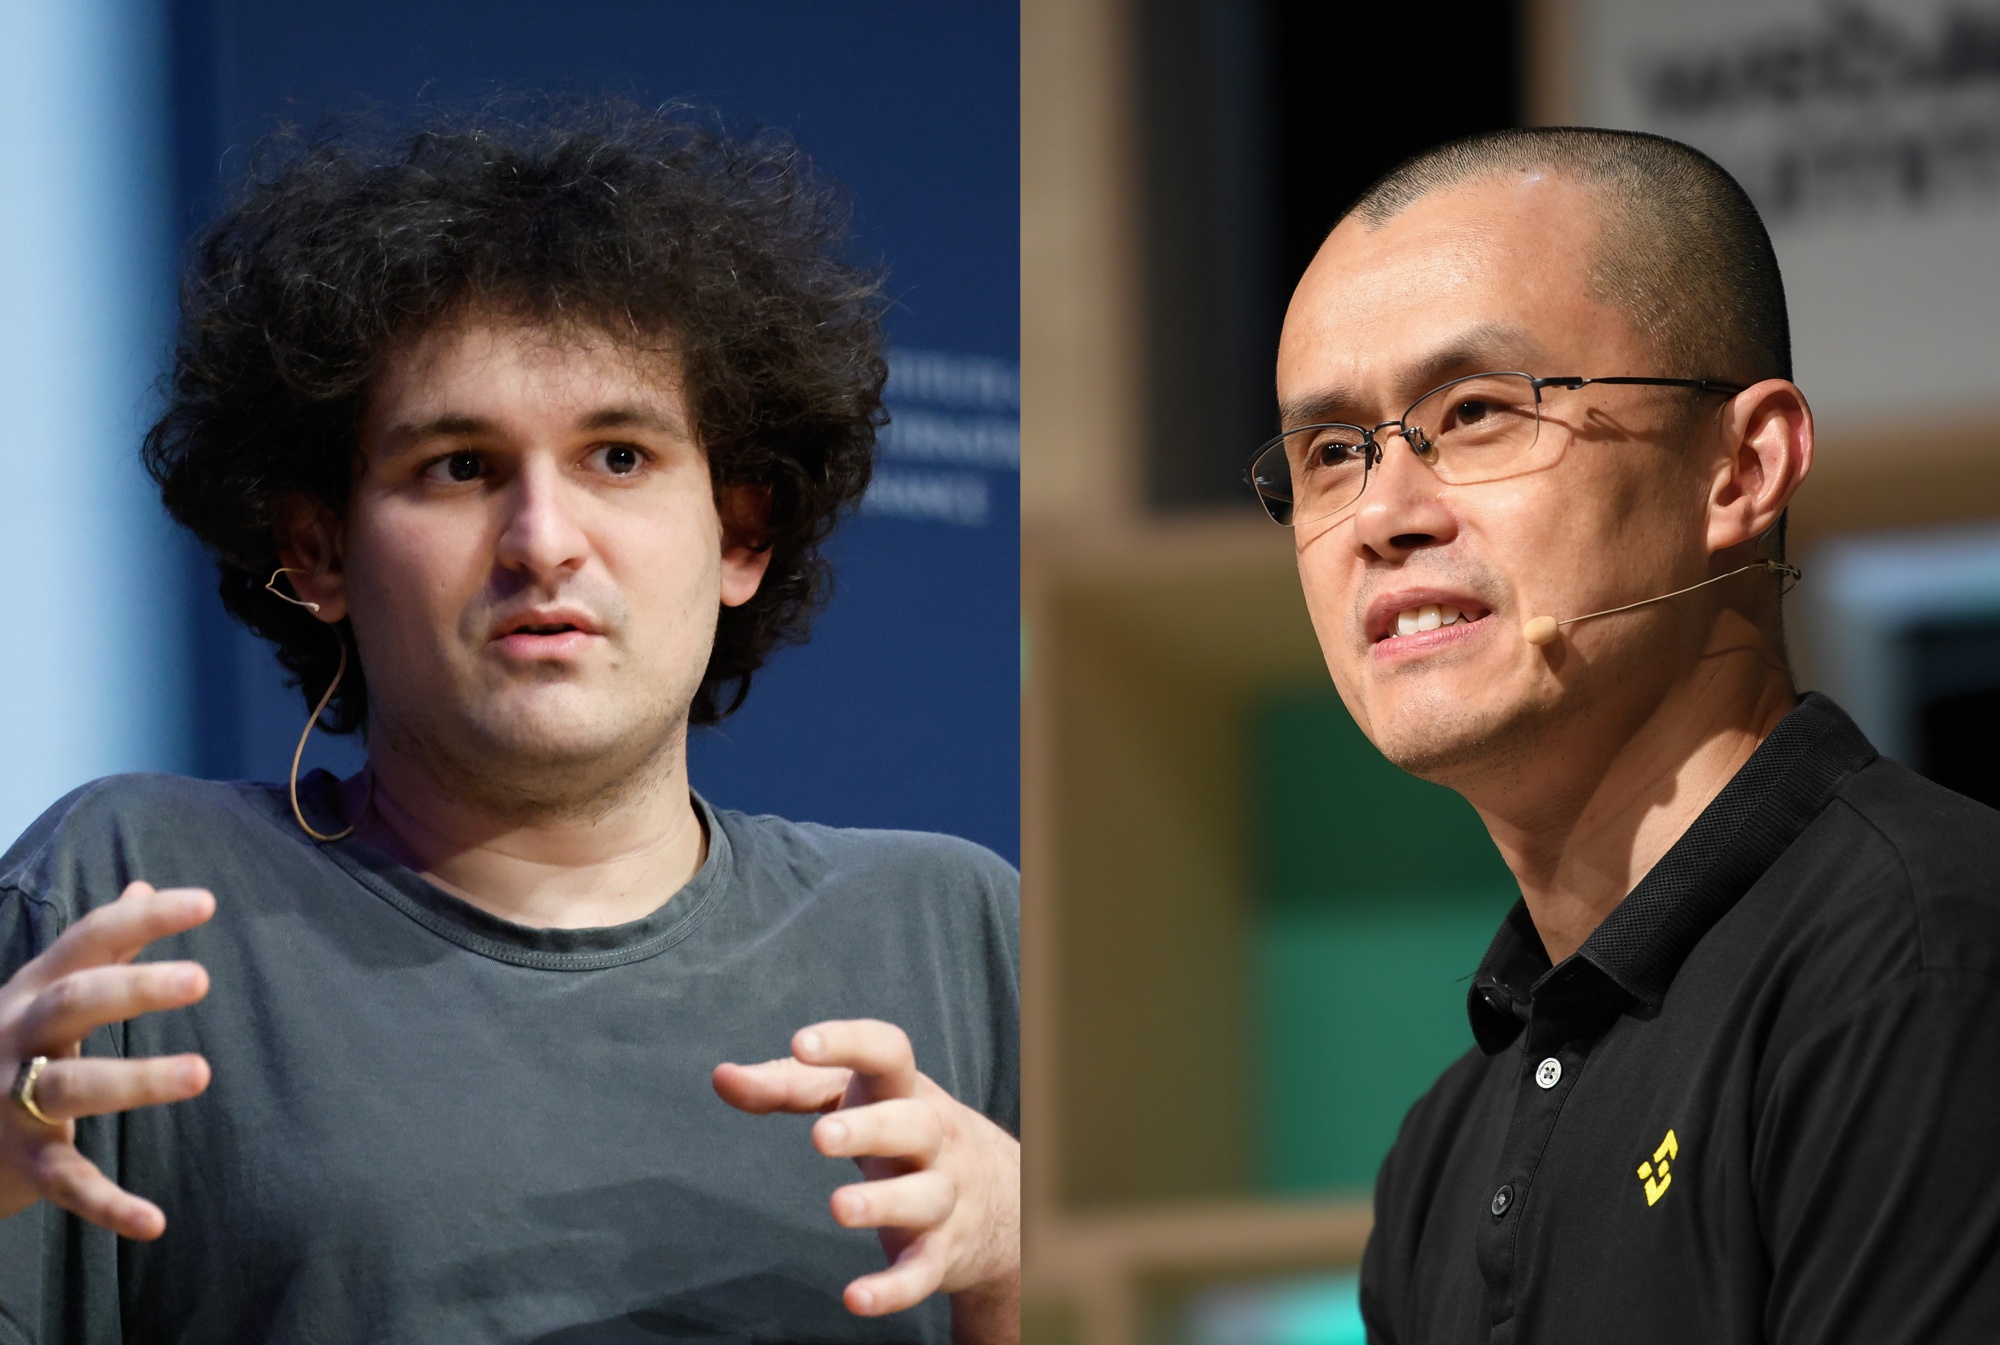 Sam Bankman-Fried, left, and Zhao “CZ” Changpeng